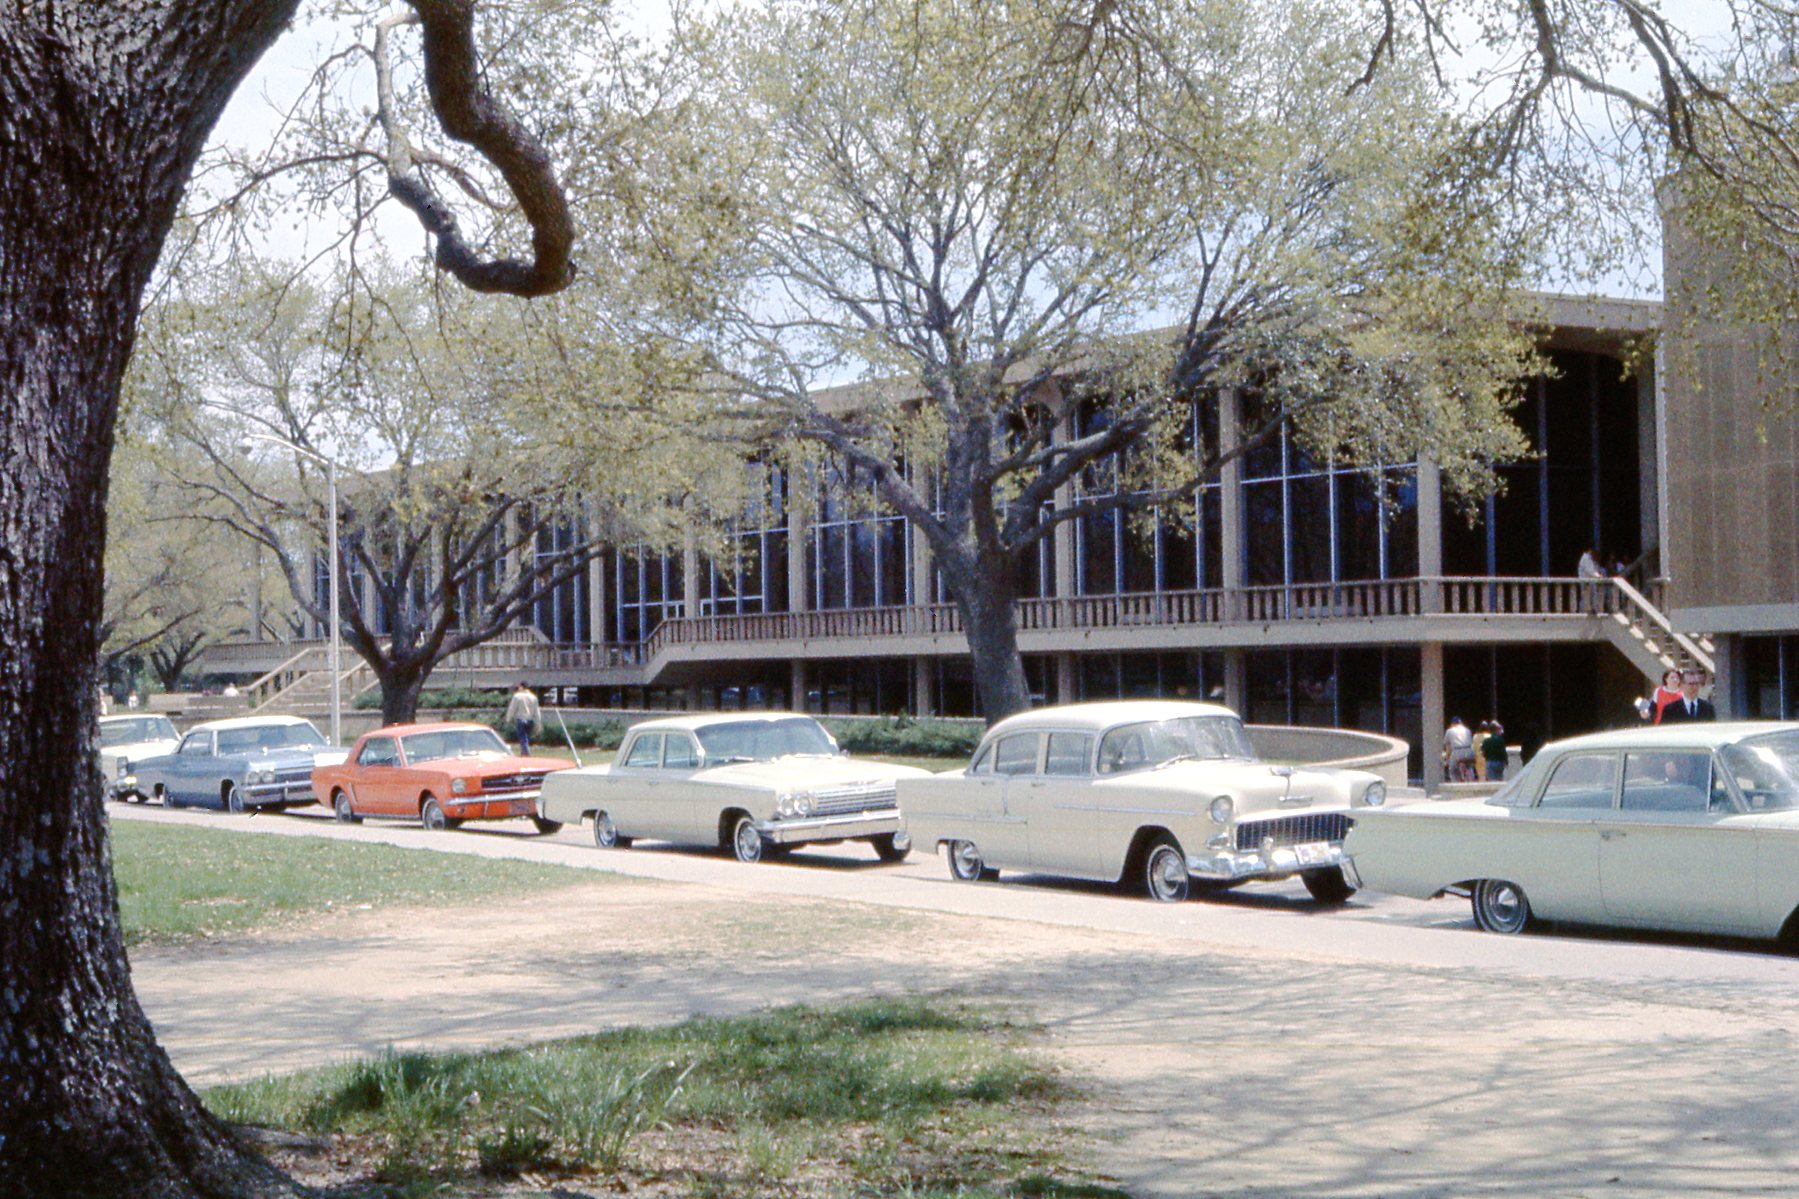 outside of the union in the 70s